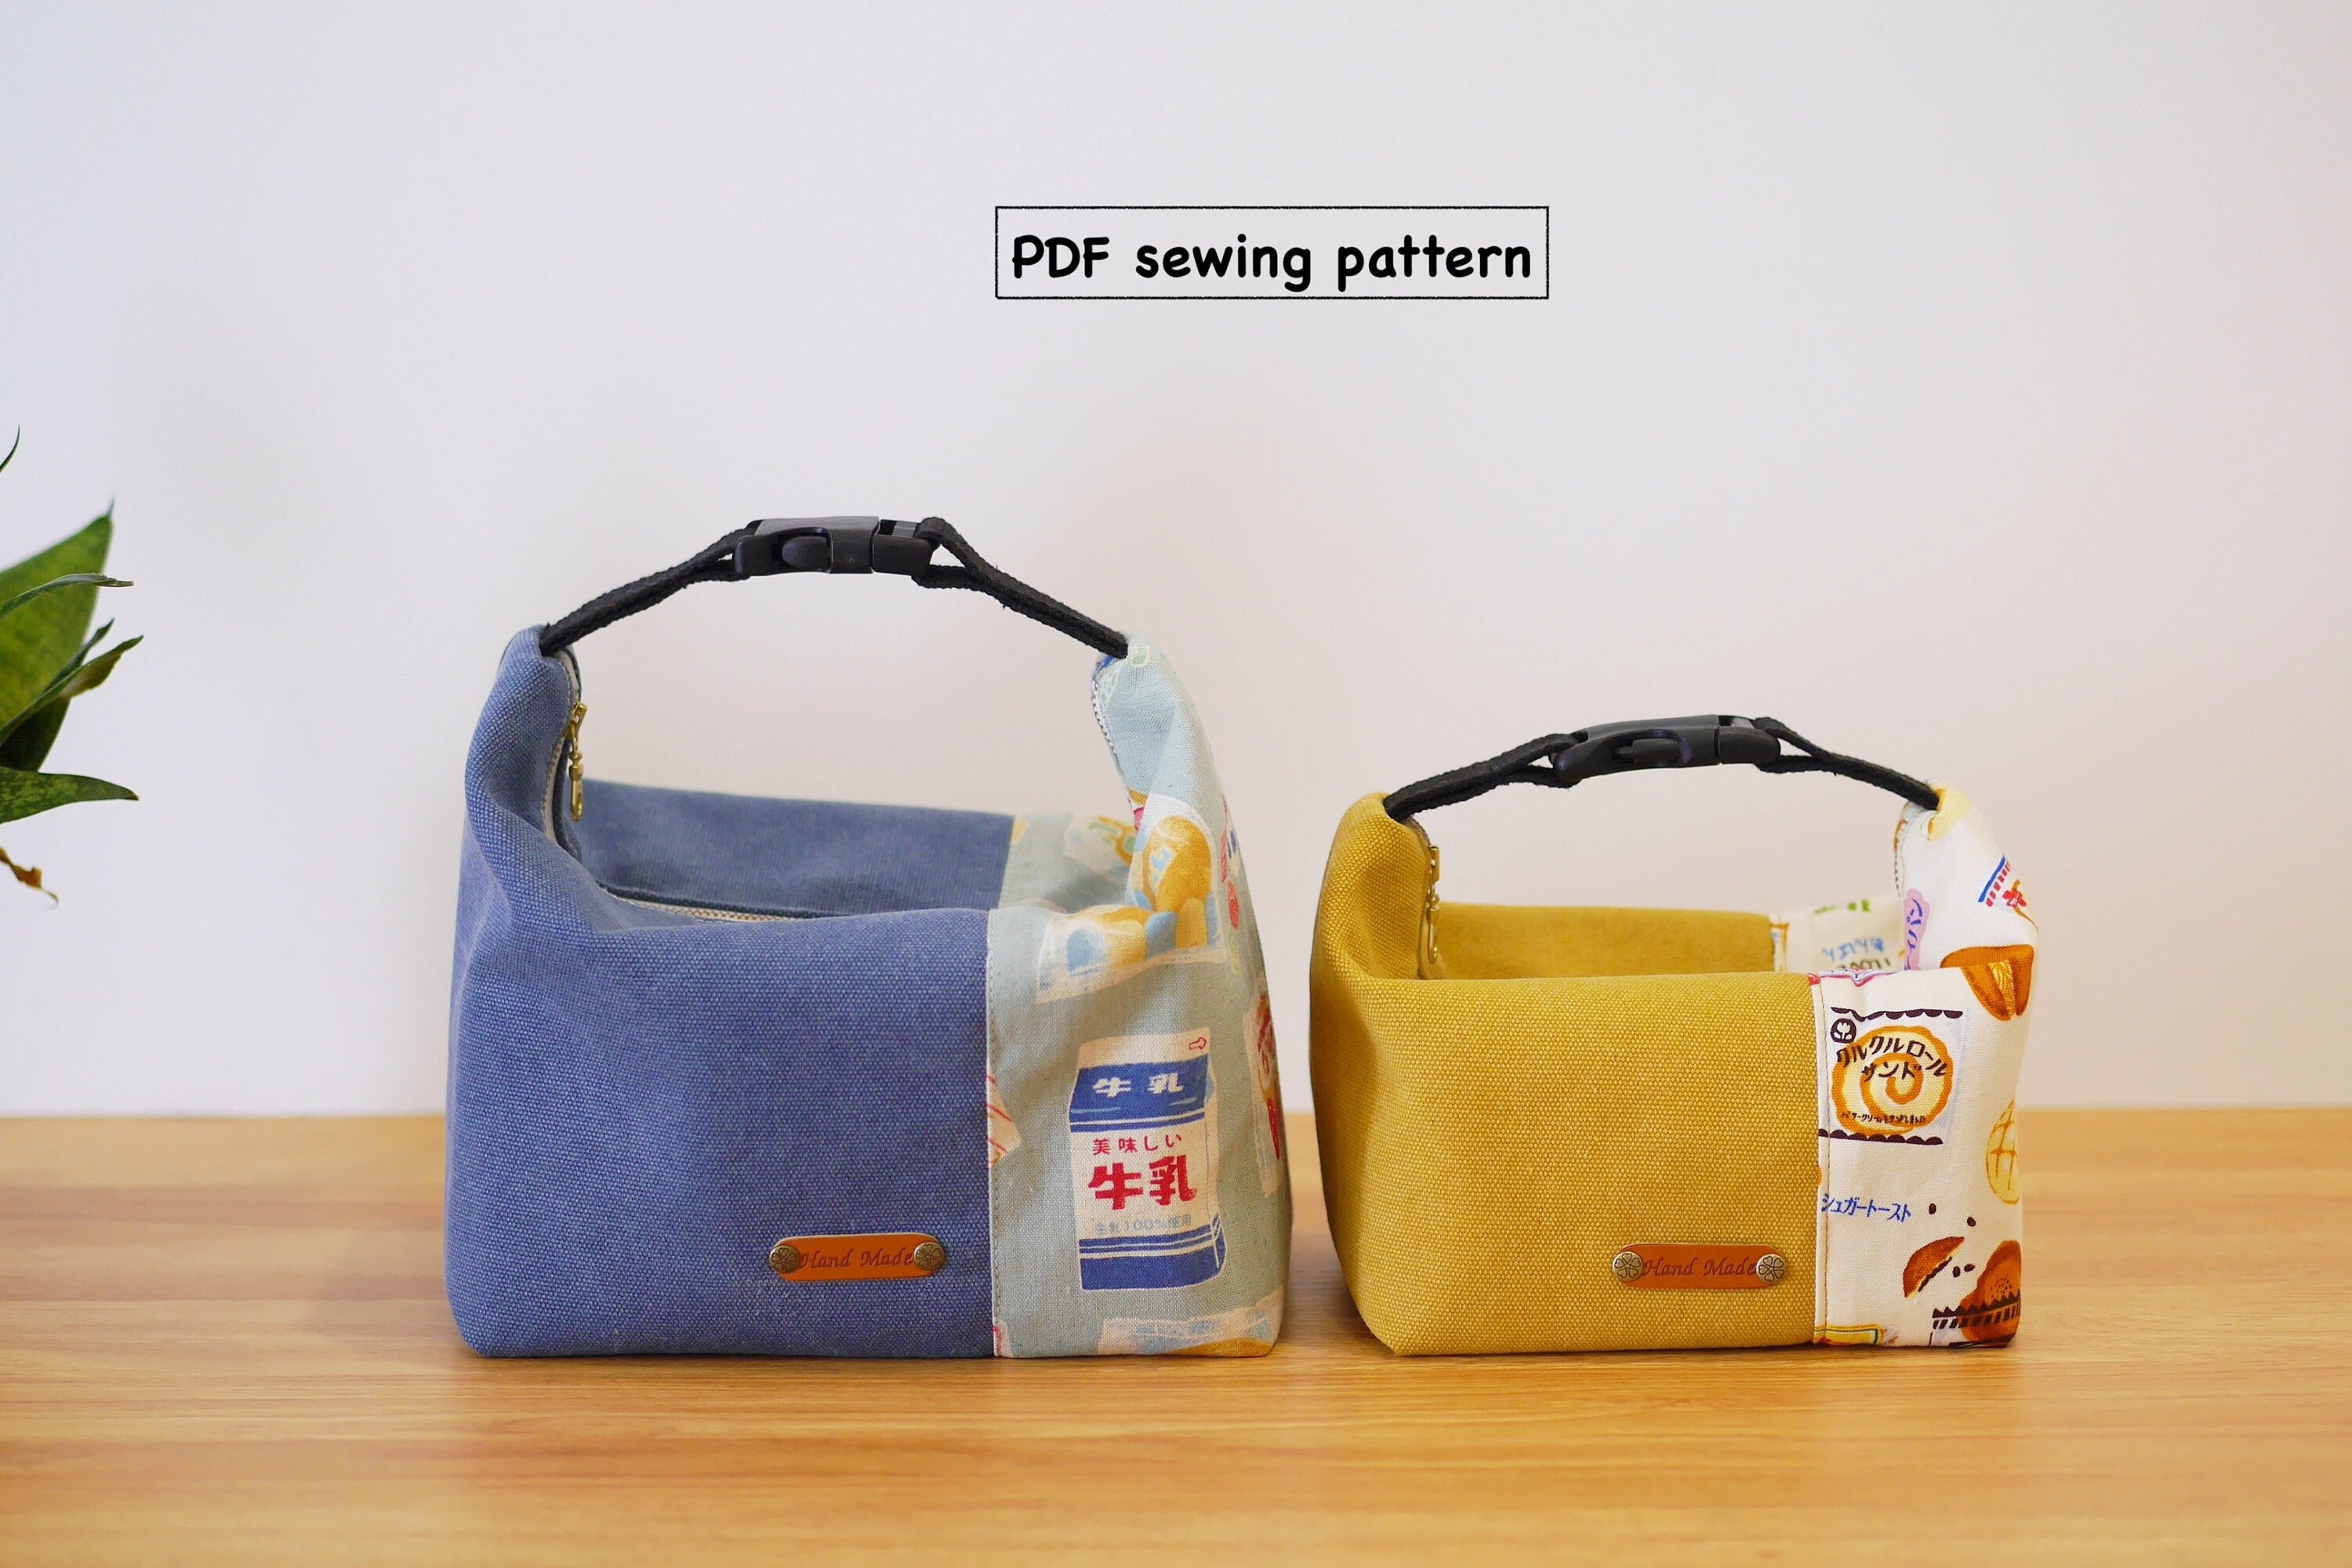 Japanese Bento Lunch Bag, Eco Friendly Reusable Durable Tote, Cute Simple  Tote, Grocery Gift For Kids Women Bridesmaids - Yahoo Shopping